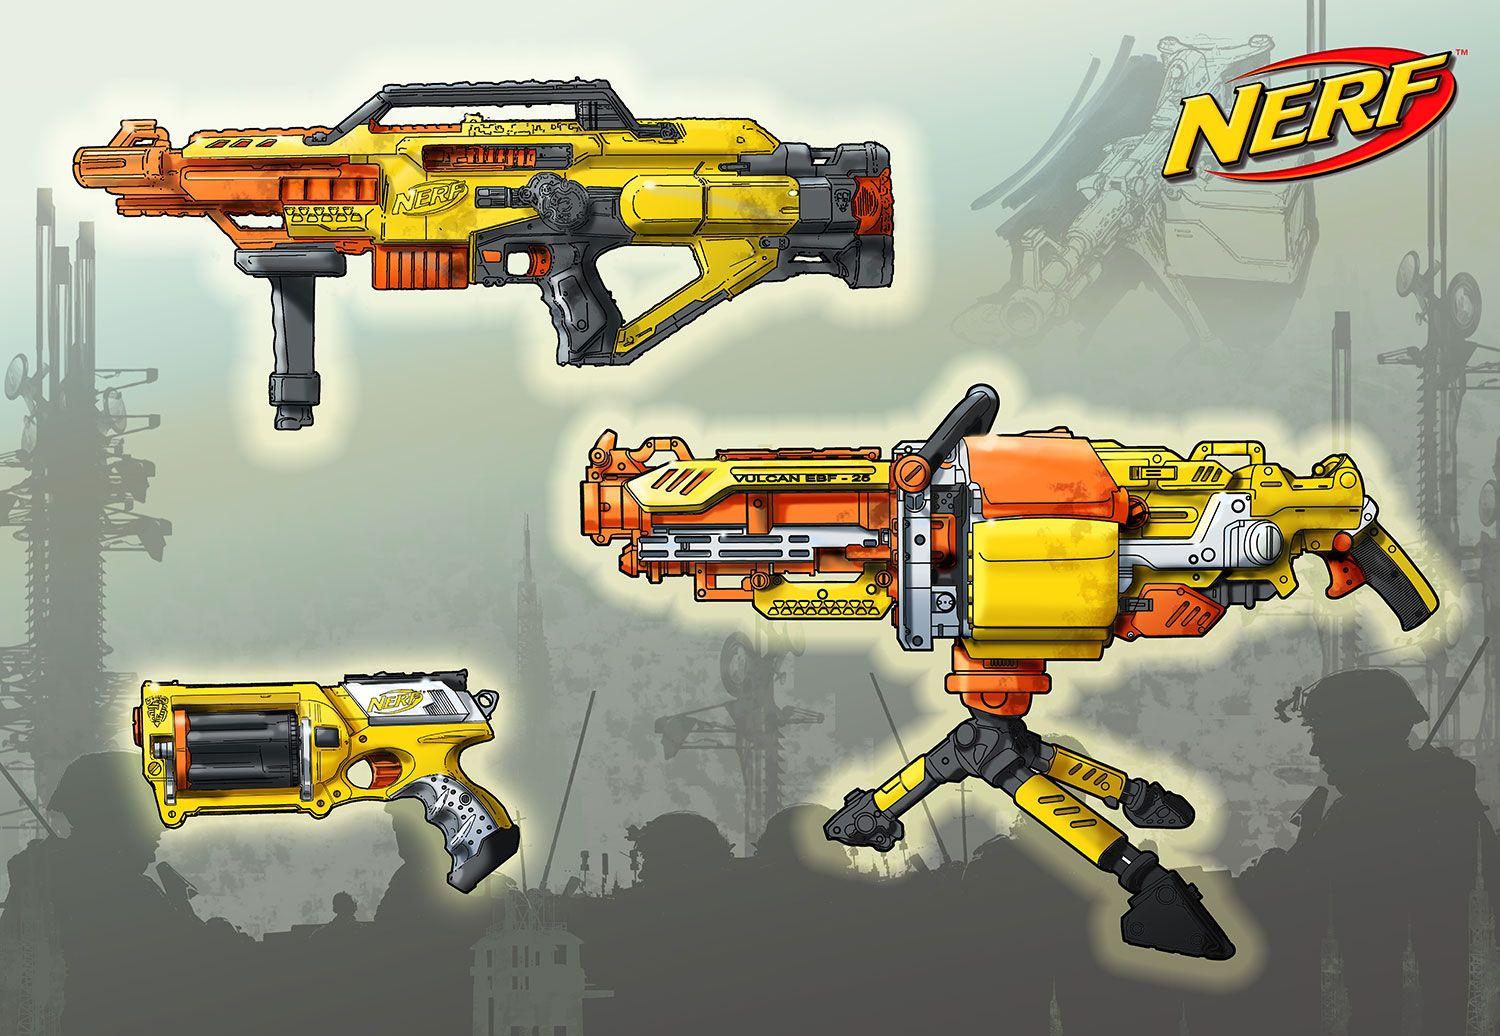 Nerf And Swarm Rifles Are Laying On A Table Inside Of A Living Room  Background Pictures Of Nerf Guns Background Image And Wallpaper for Free  Download